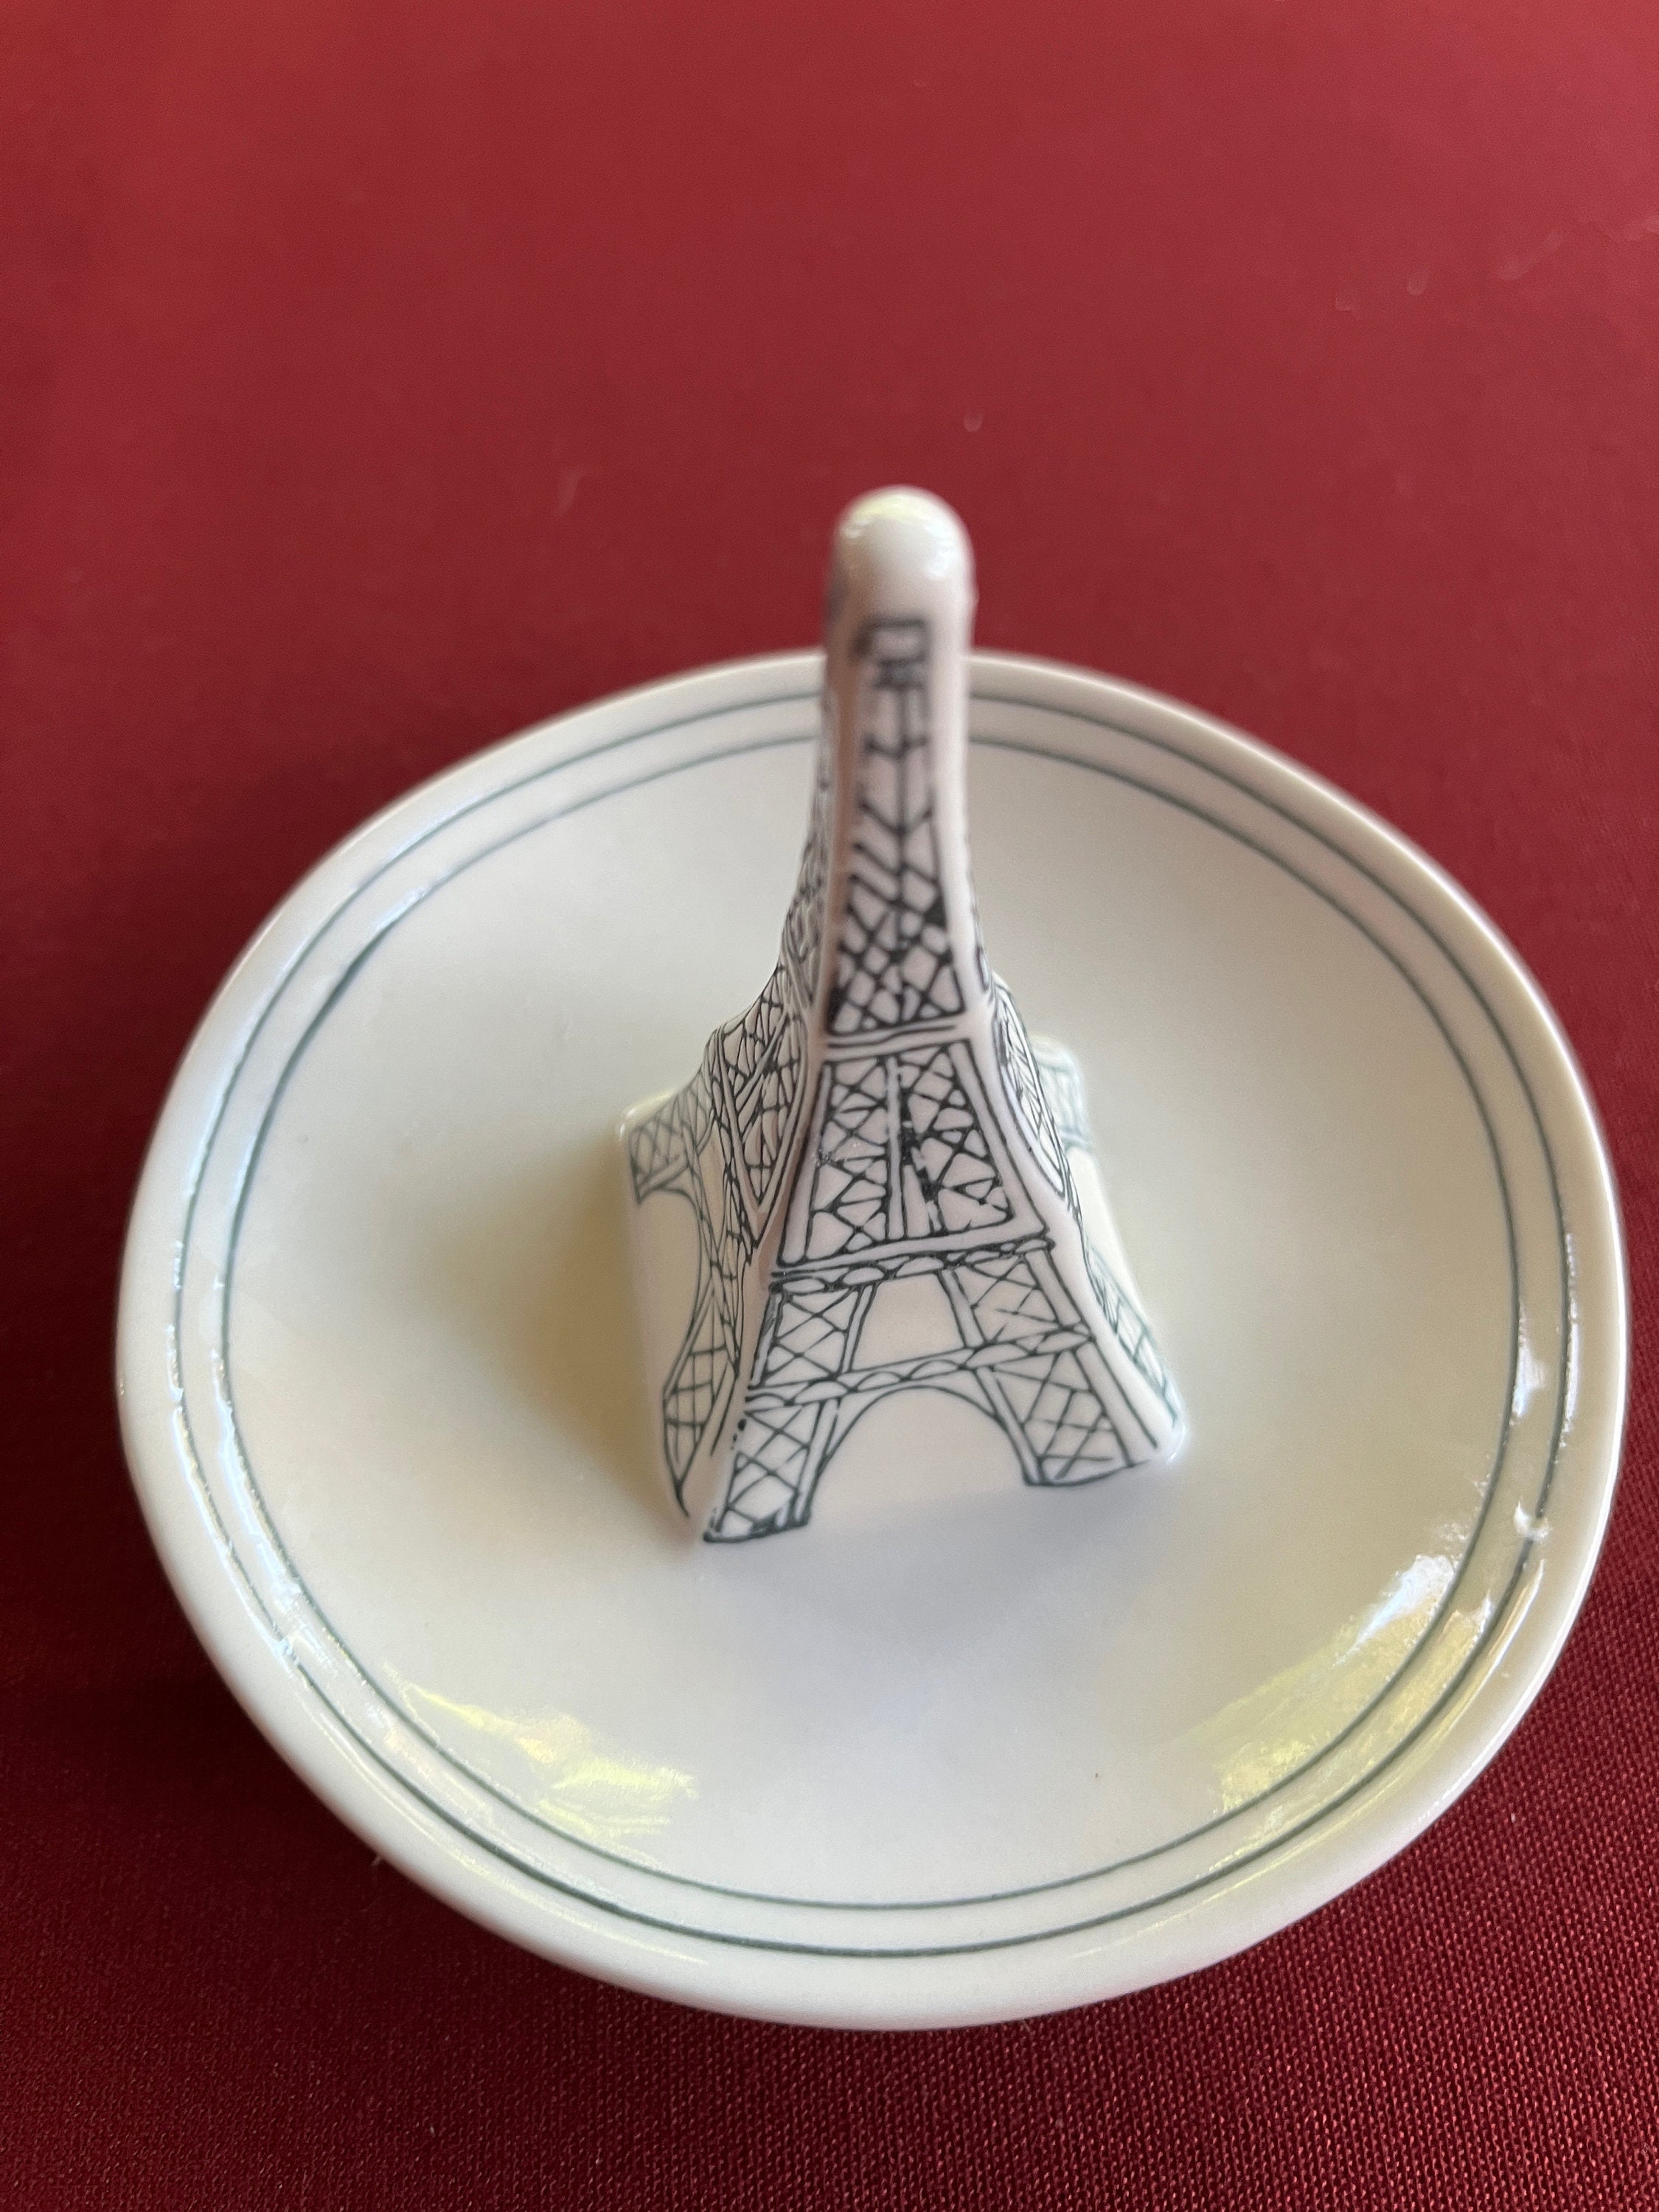 DIY: EIFFEL TOWER RING HOLDER from Polymer Clay - YouTube